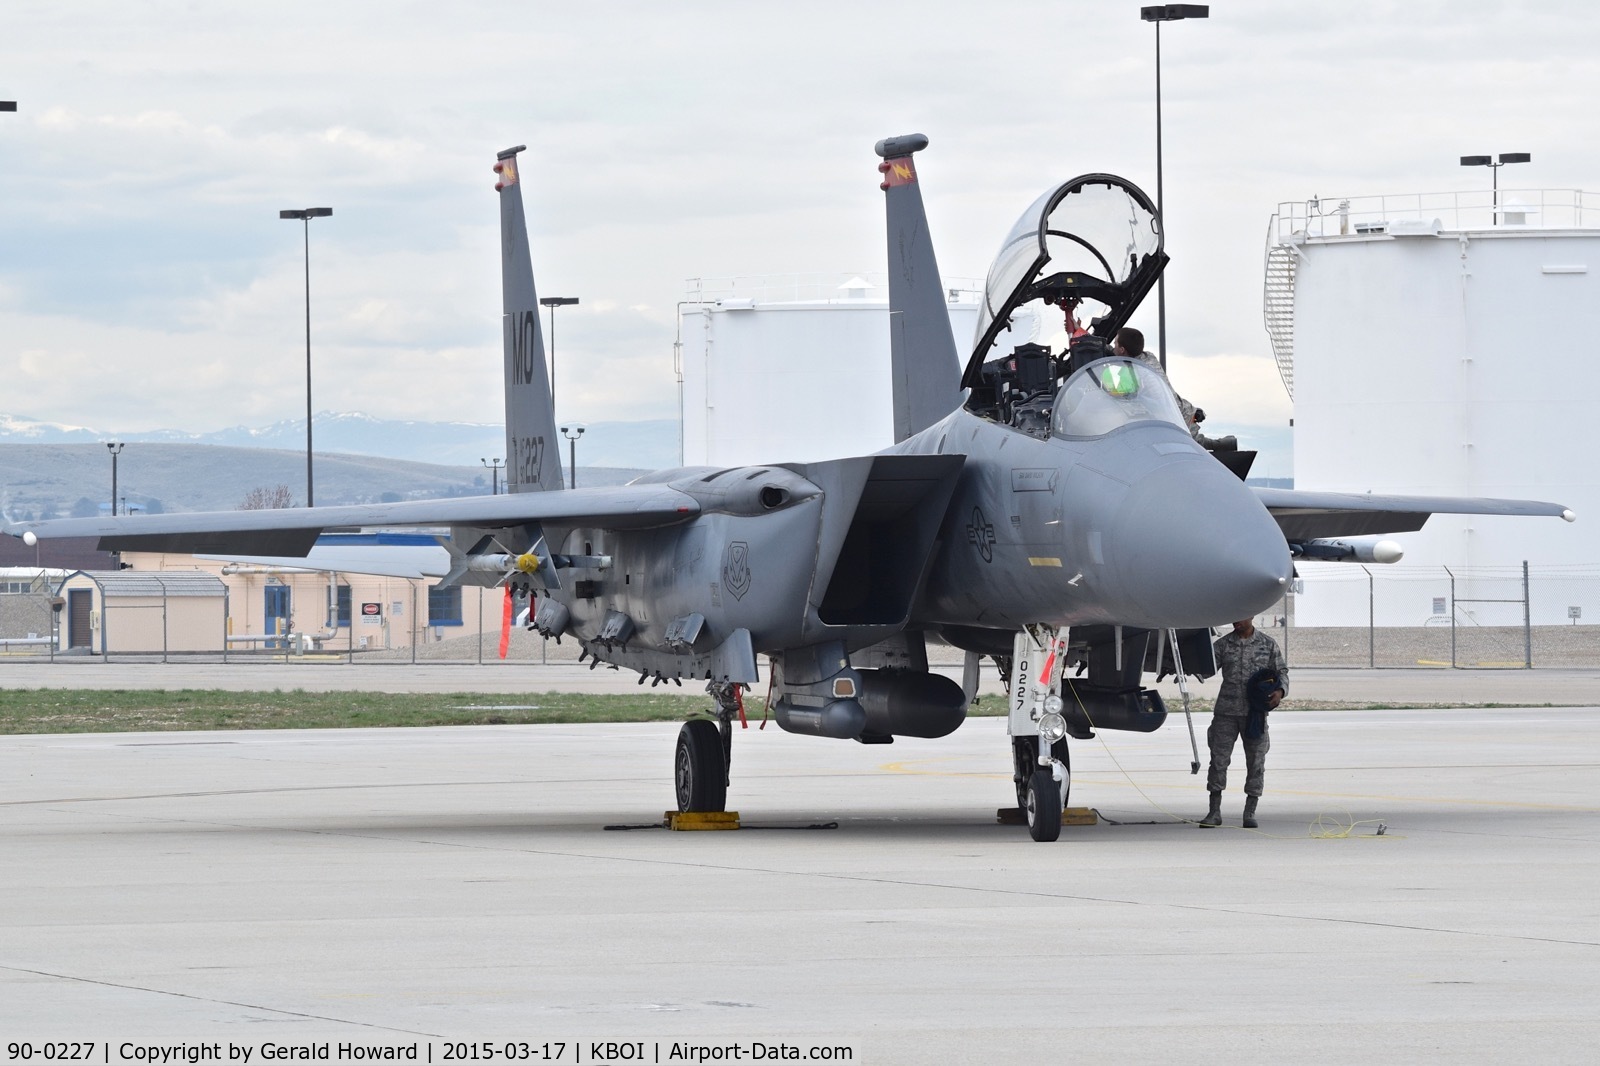 90-0227, 1990 McDonnell Douglas F-15E Strike Eagle C/N 1155/E129, Getting some maintenance on the Idaho ANG ramp. 391st Fighter Sq. 